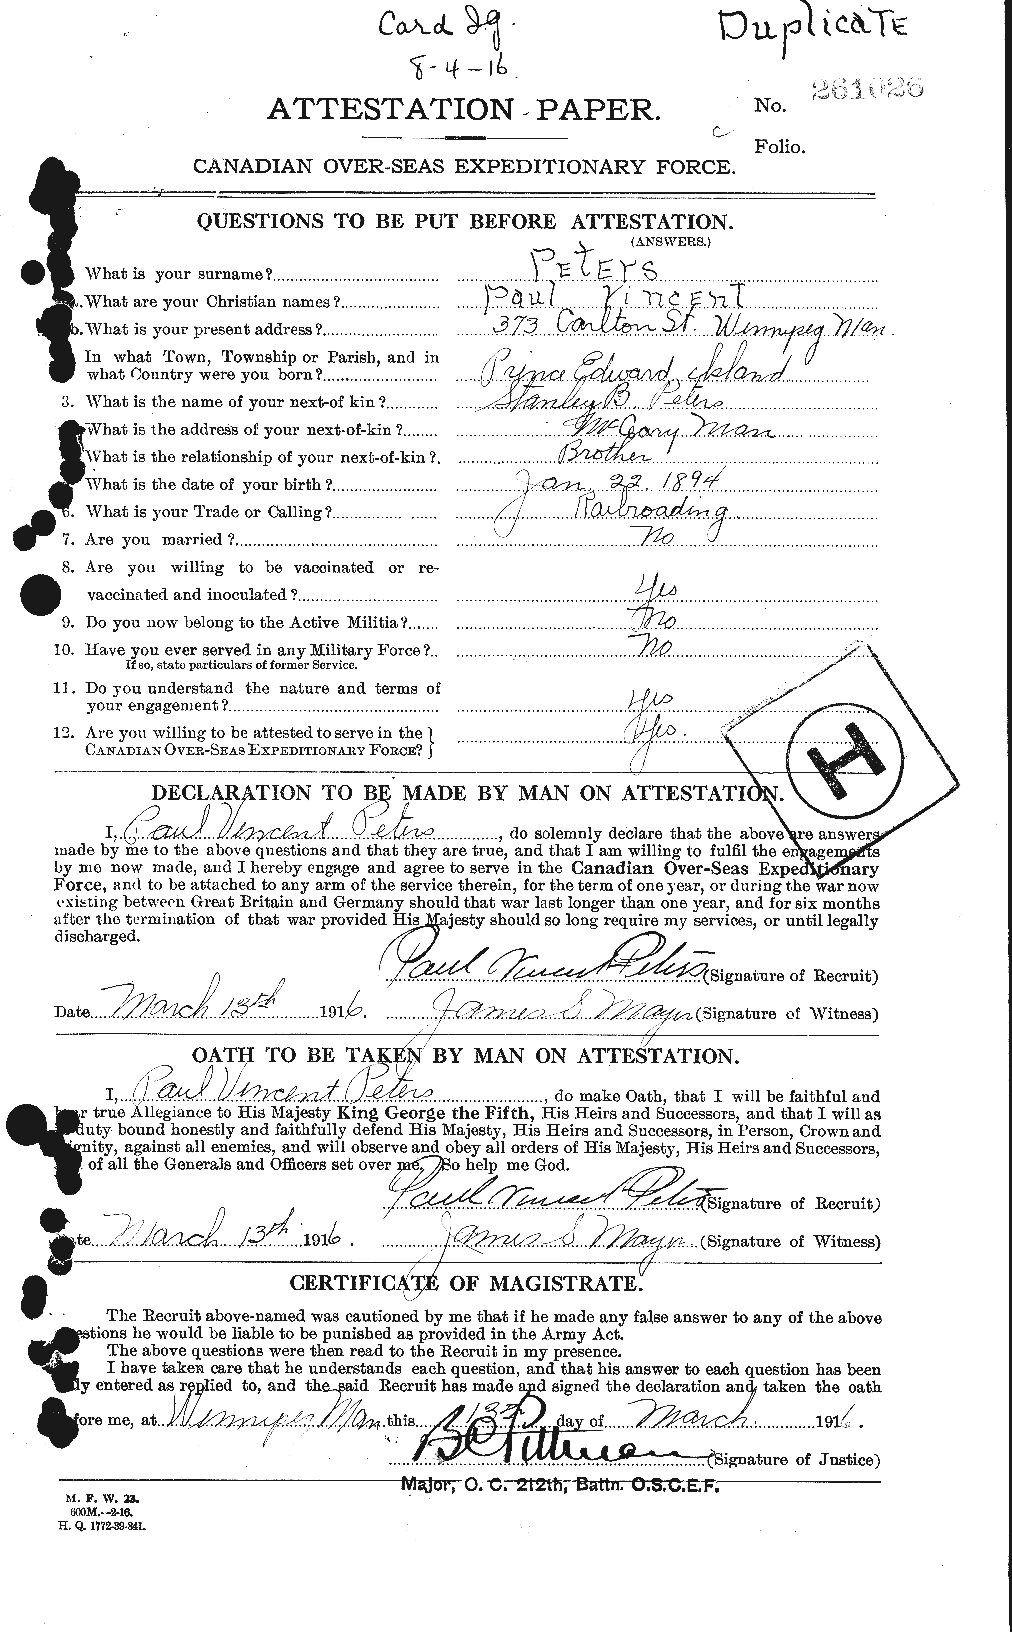 Personnel Records of the First World War - CEF 575594a